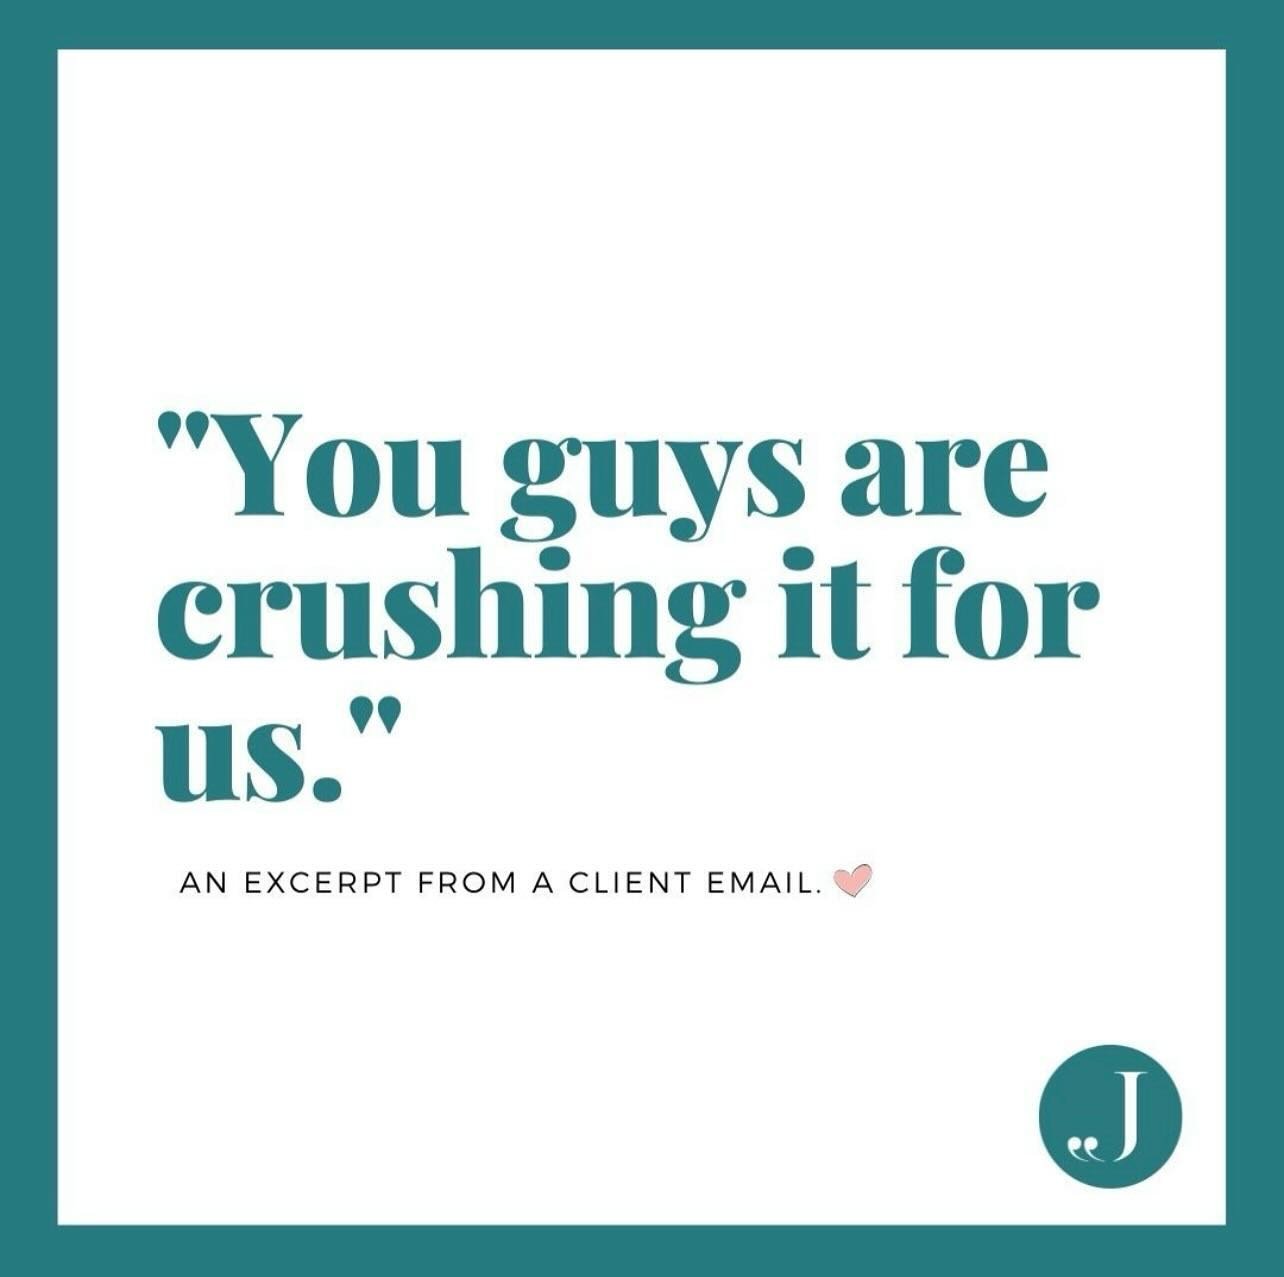 There&rsquo;s nothing quite like the warmth  of a client&rsquo;s note to brighten up even the gloomiest of days. ☀️#ClientFeedback #Motivation.